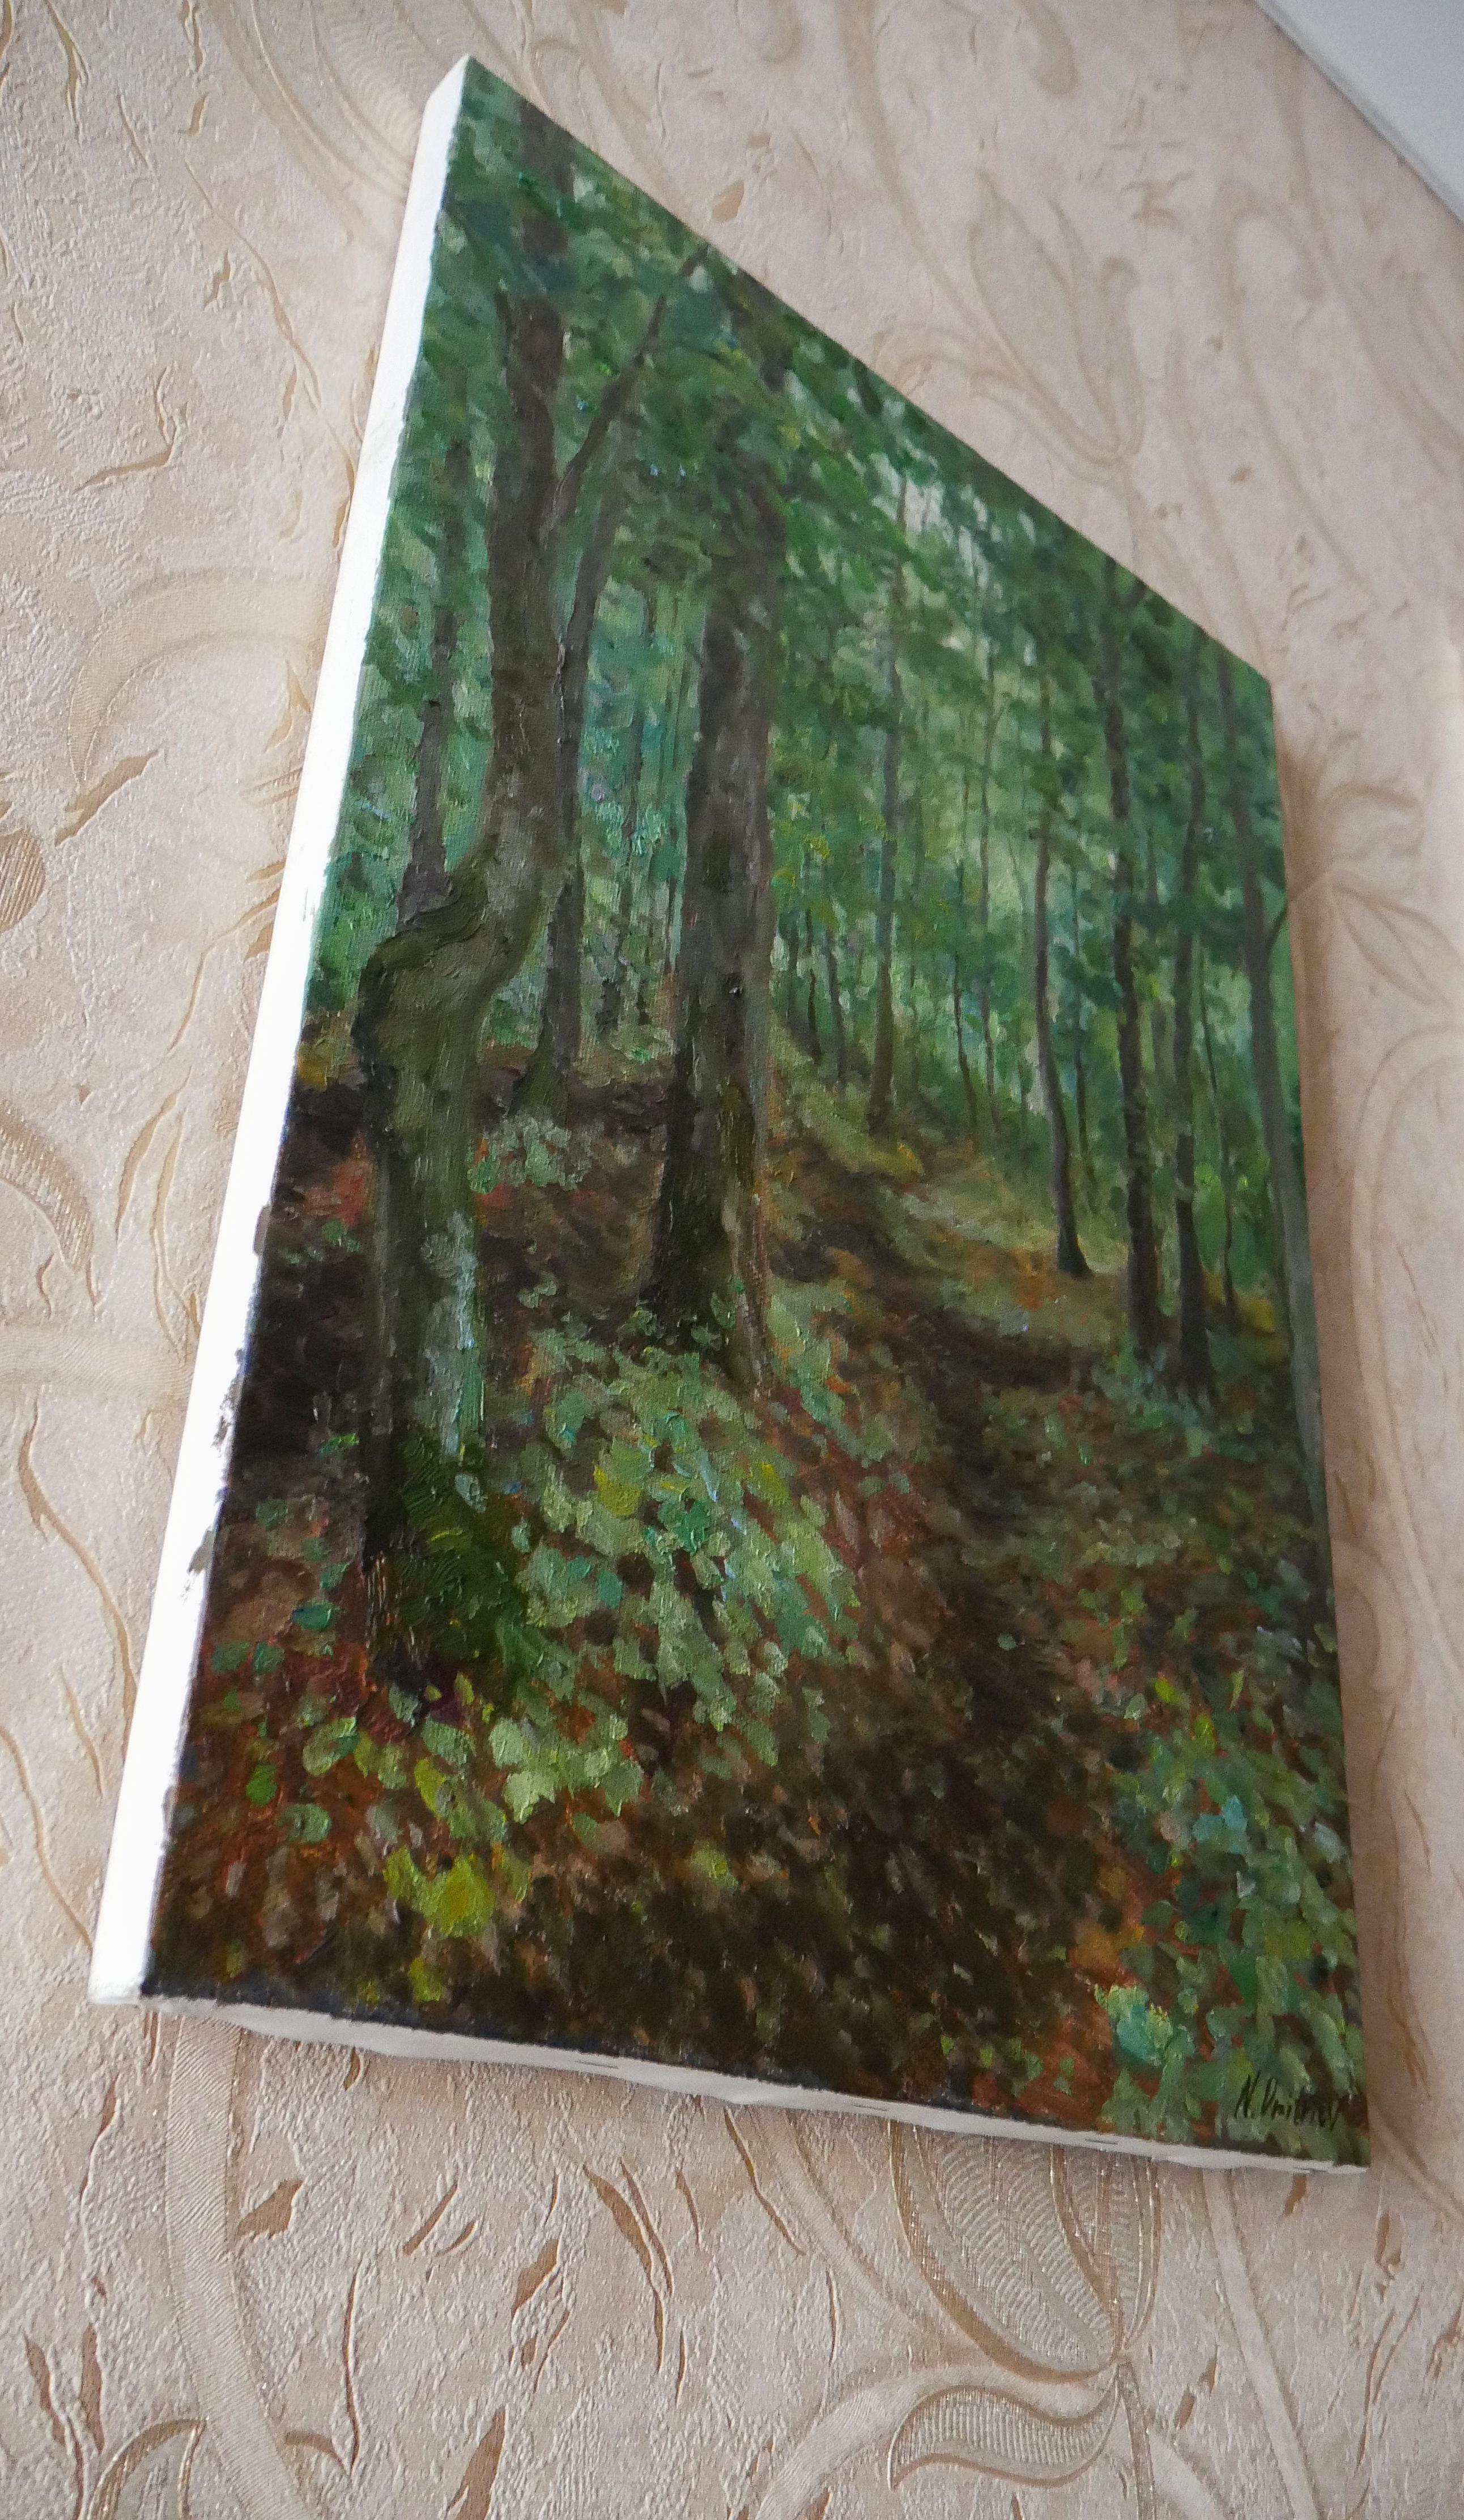 Green color always gives us calm. When we come to the forest we feel peace.
The artist believes that each of us knows that feeling, when you are walking the forest path, You hear the noise of leaves and the birdsong.

The picture is author's and